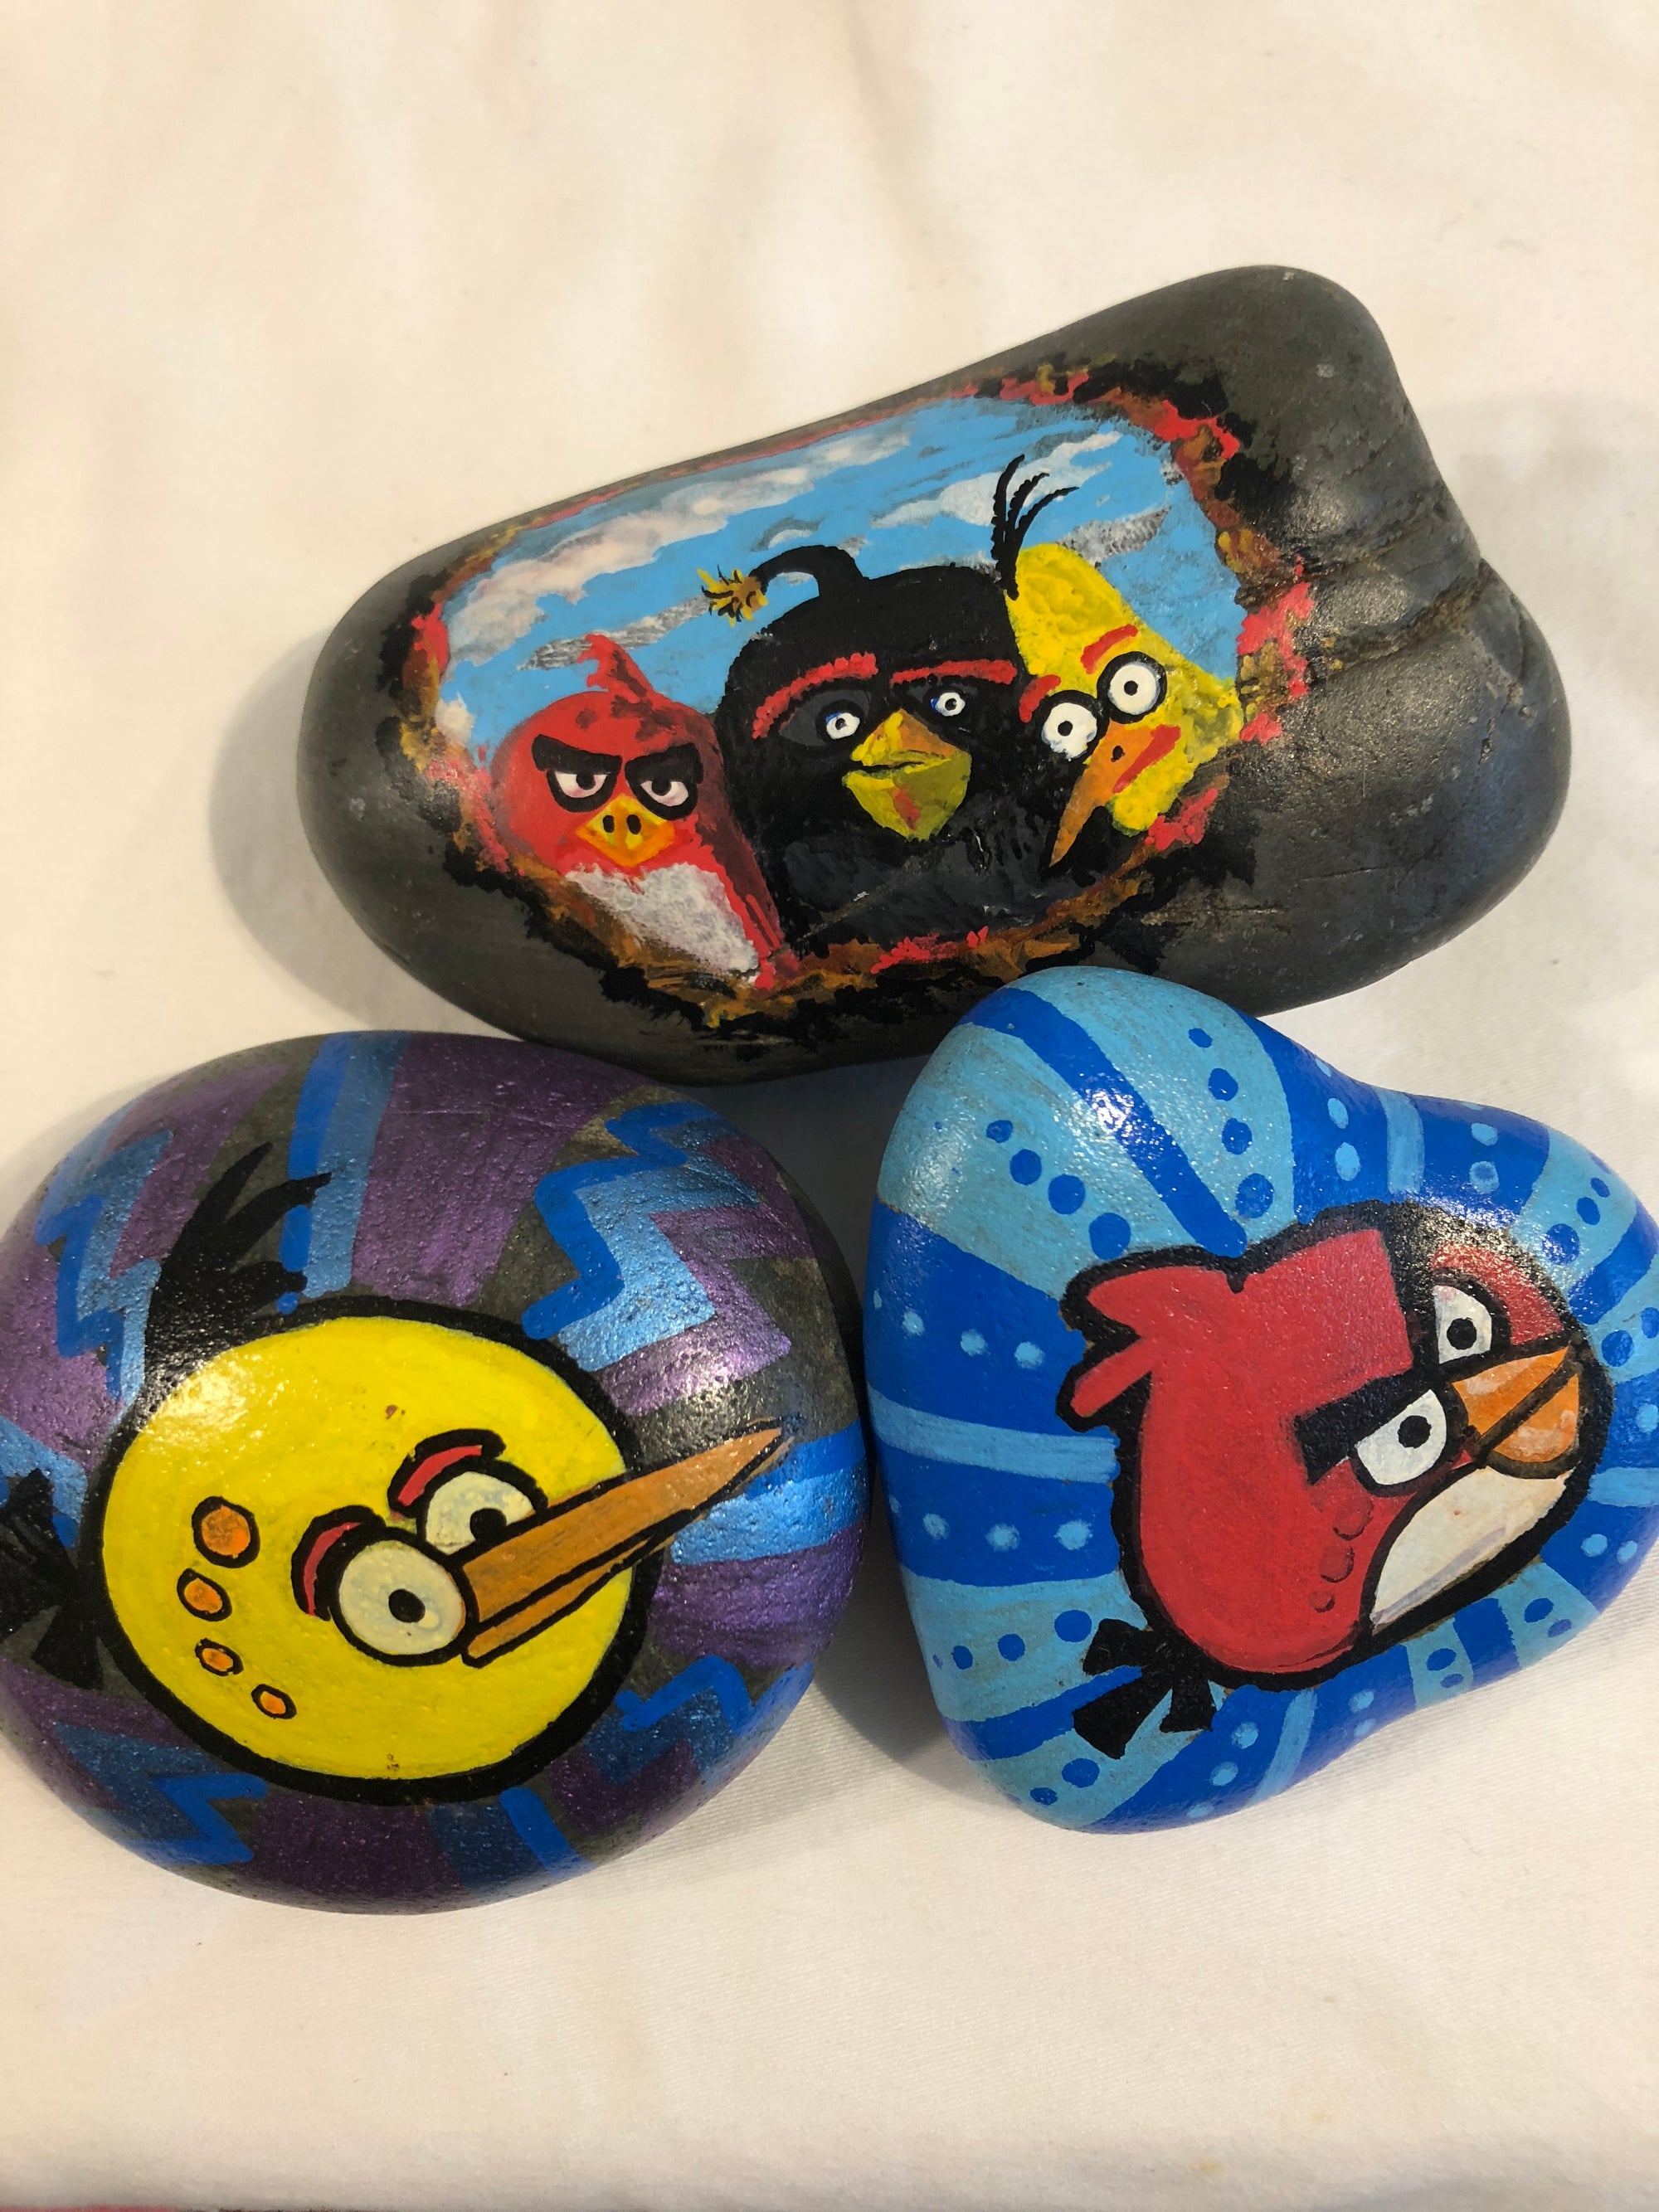 Benefits of rock painting for children